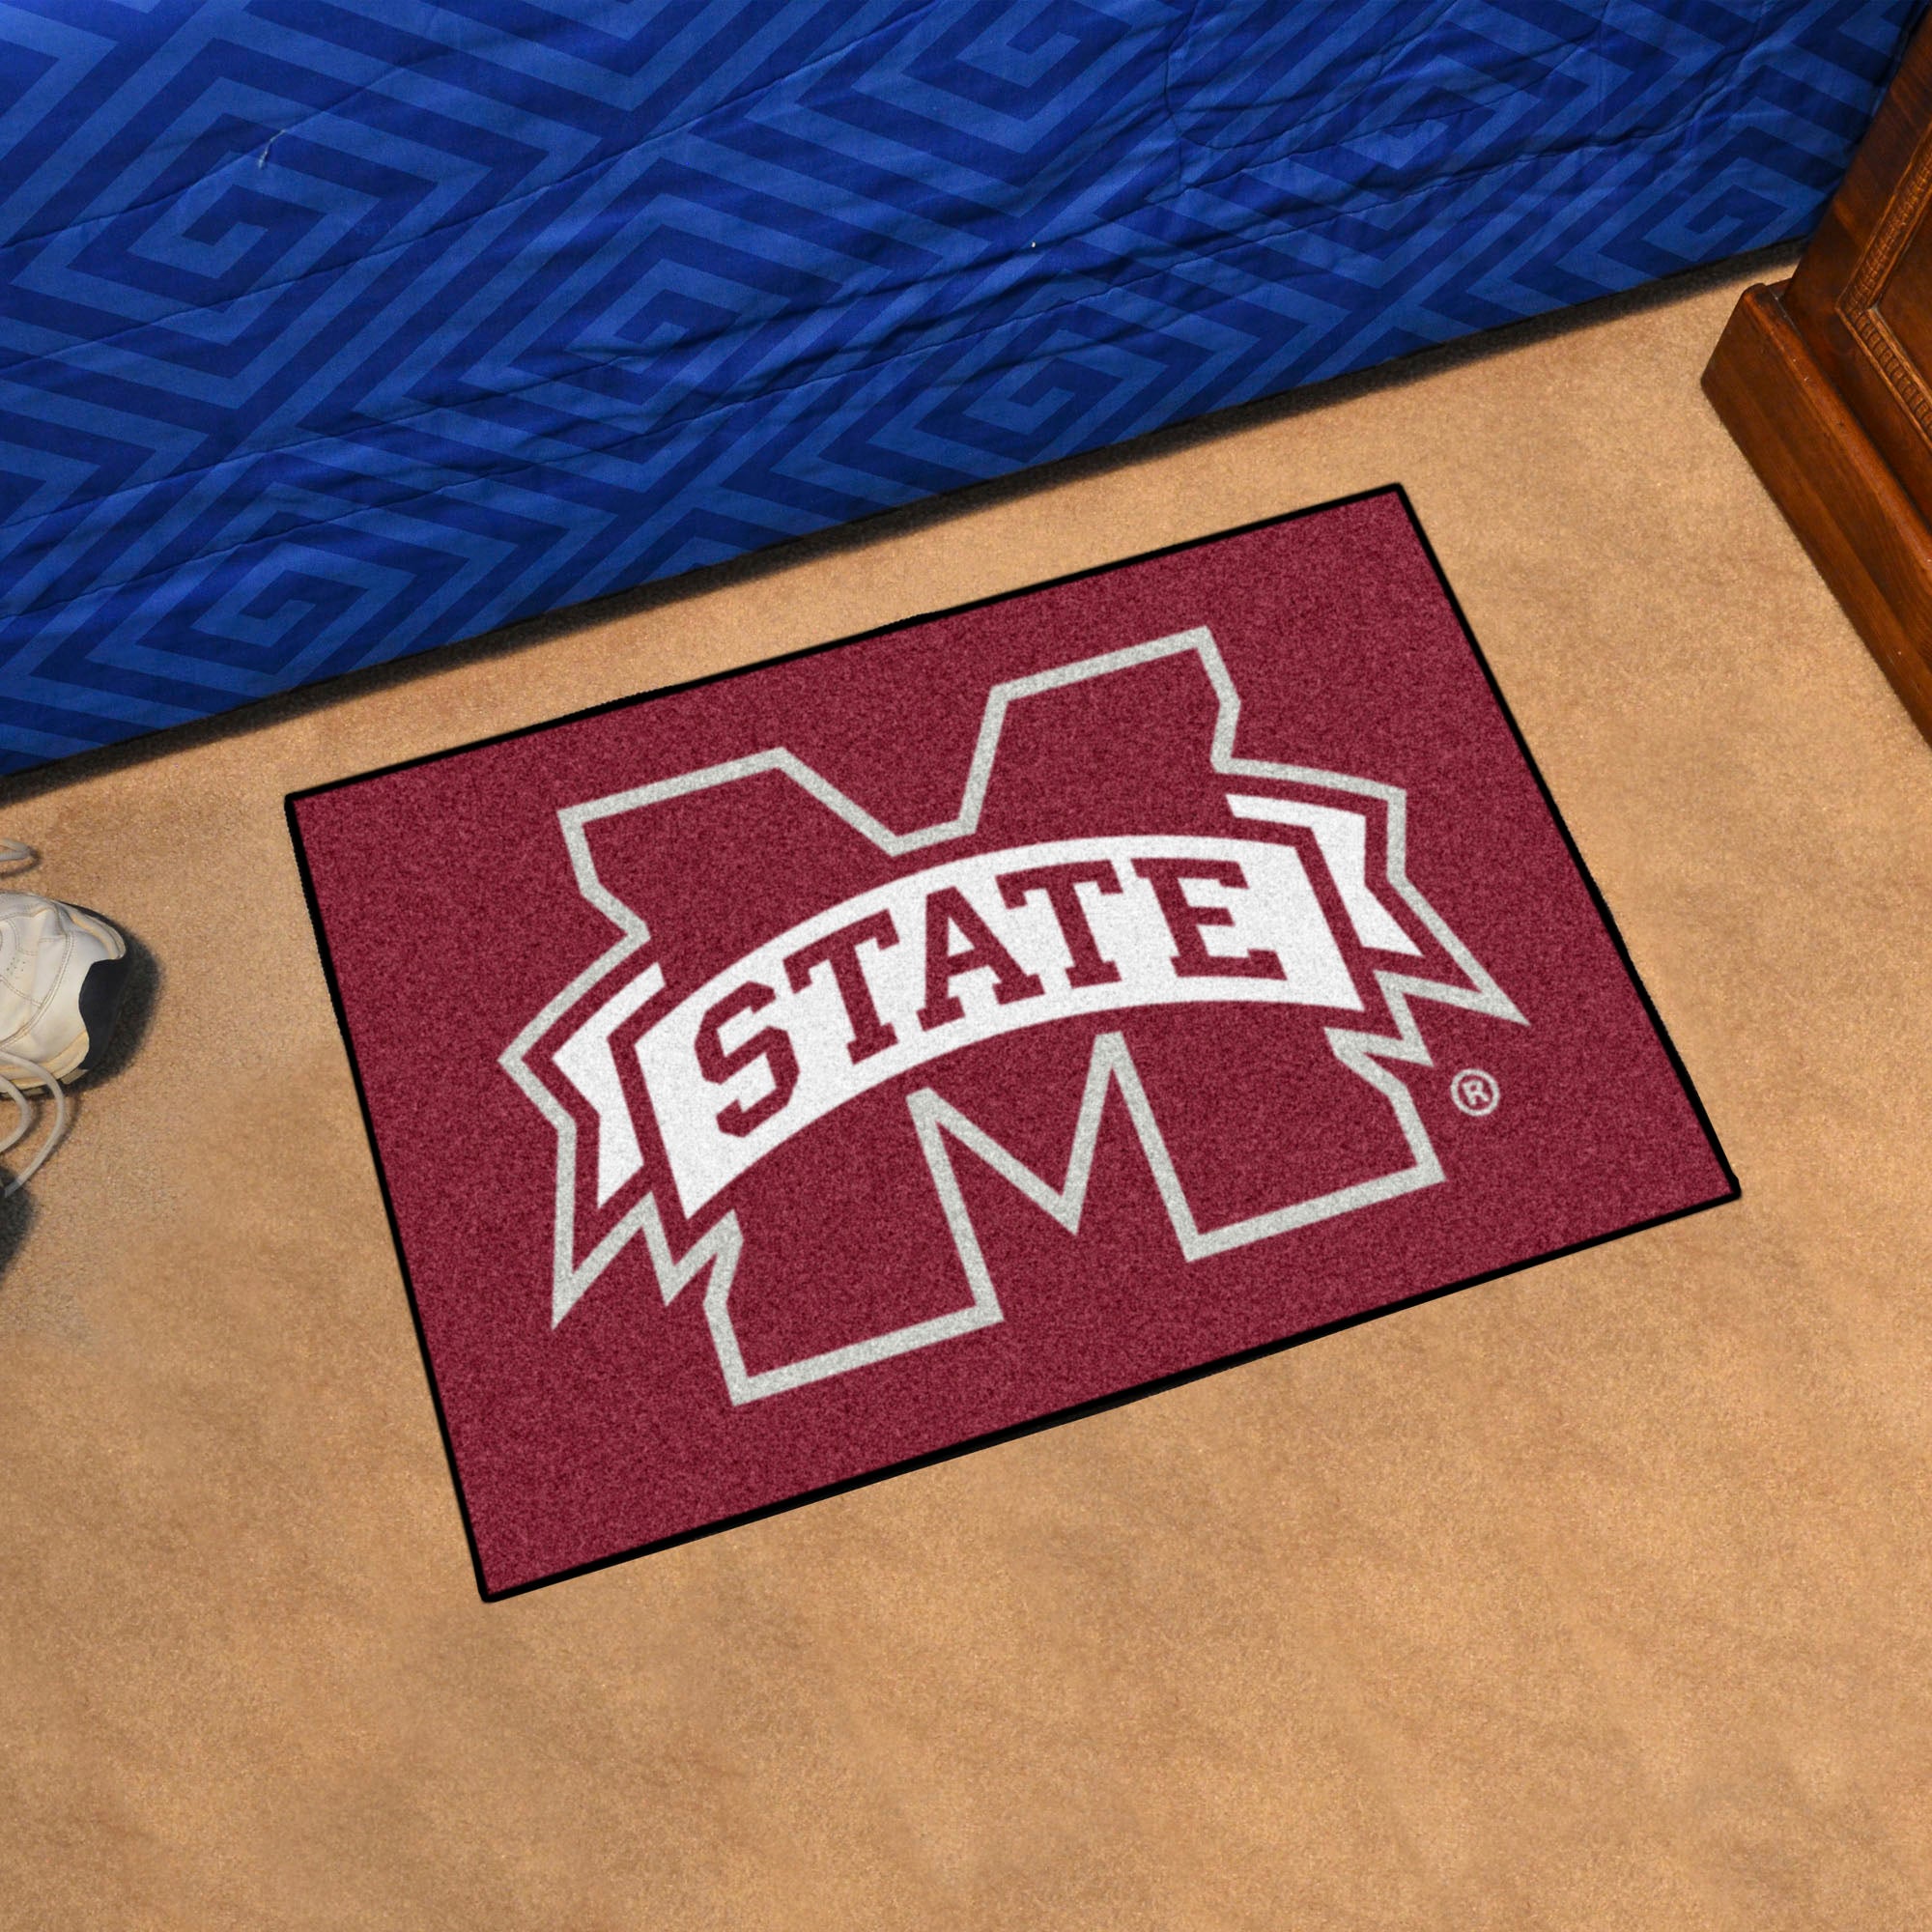 FANMATS, Mississippi State University Rug - 19in. x 30in.